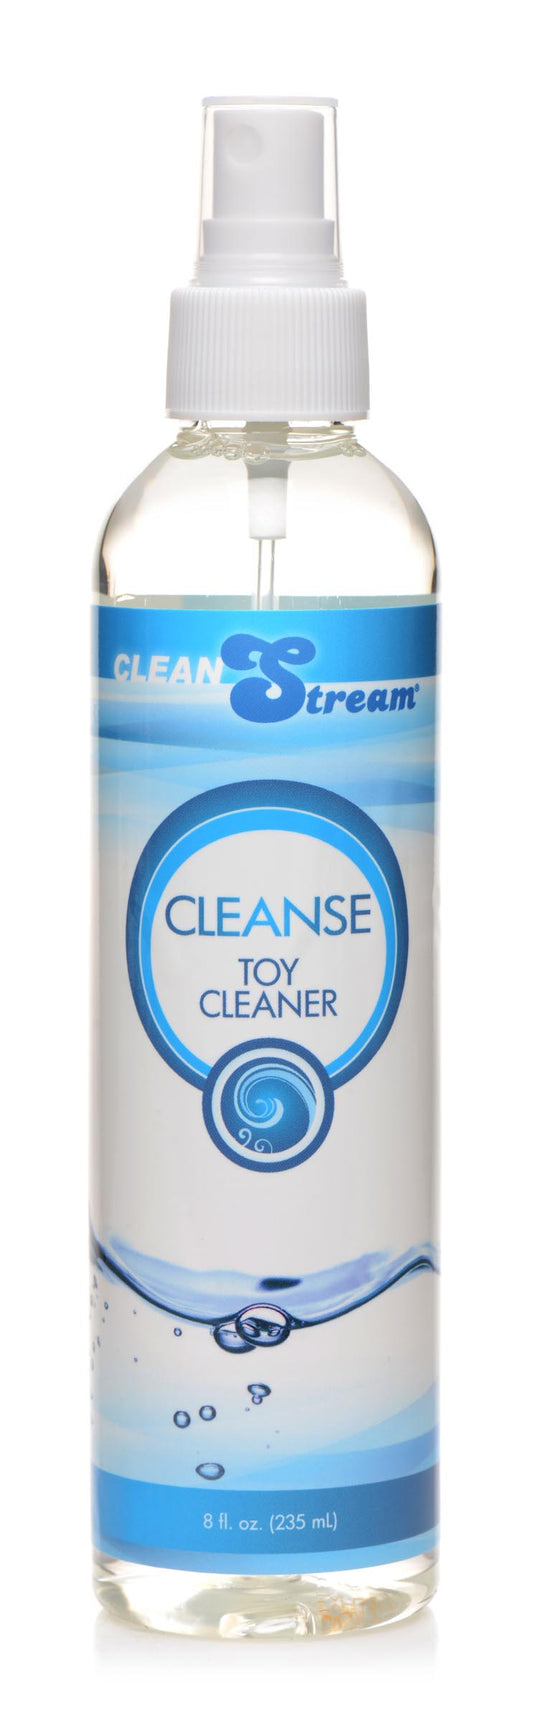 CleanStream Cleanse Natural Cleaner - 8 oz - UABDSM